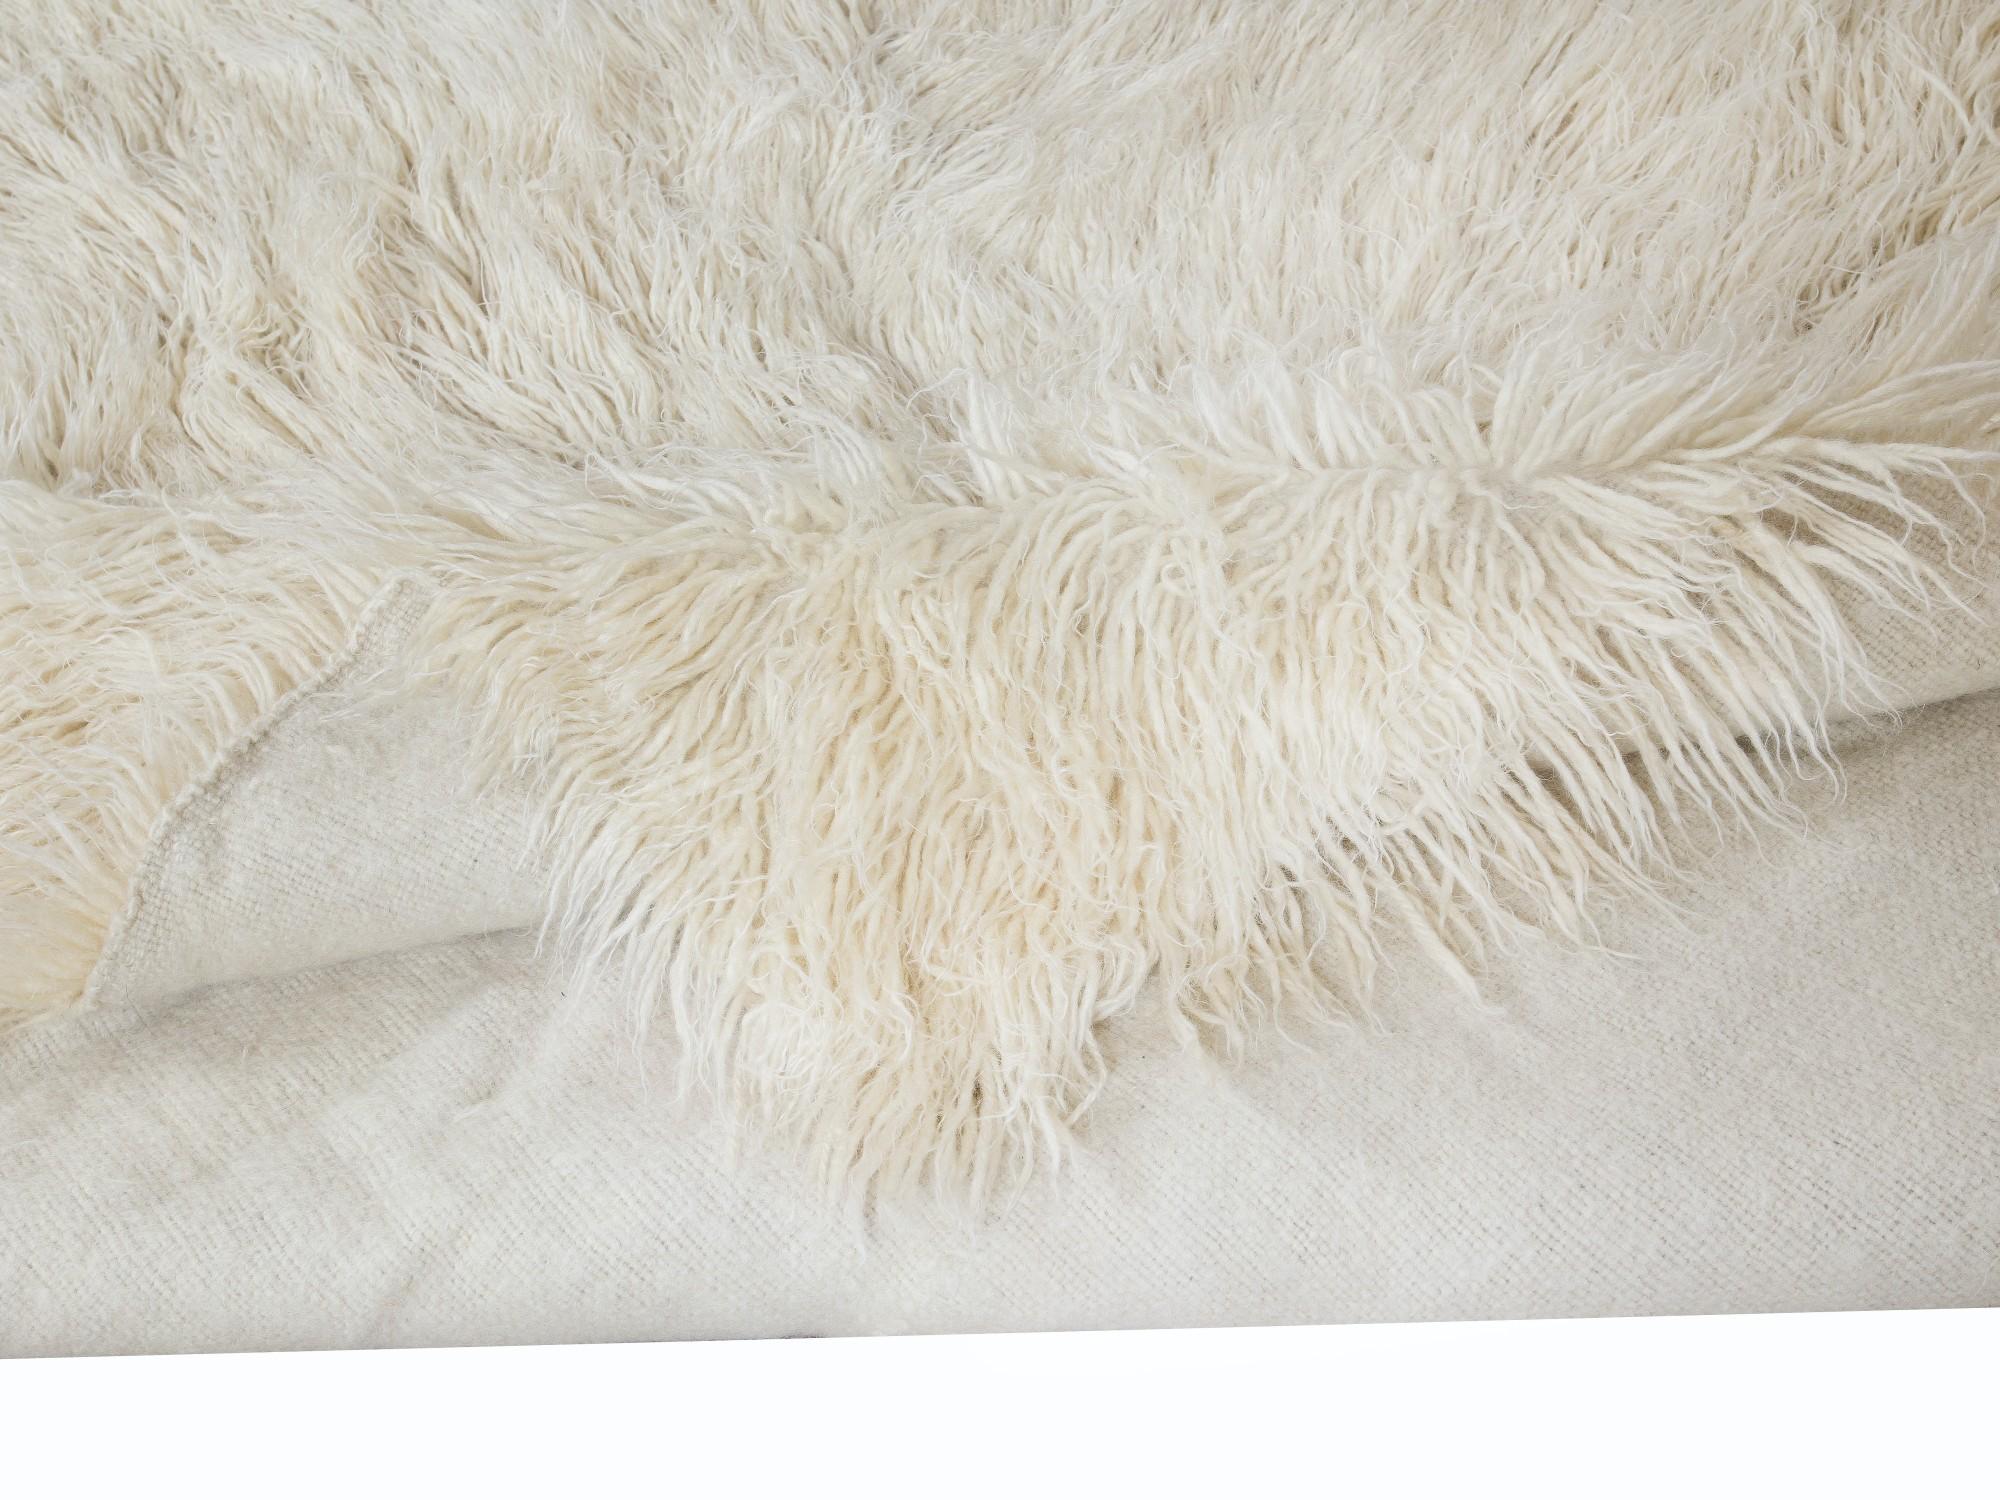 A vintage hand-knotted shag pile rug made of natural undyed mohair derived from local “Angora Goats” that are famous for their soft, lustrous long fleece. A true testament to Anatolian craftsmanship, this rug brings together the softness of mohair